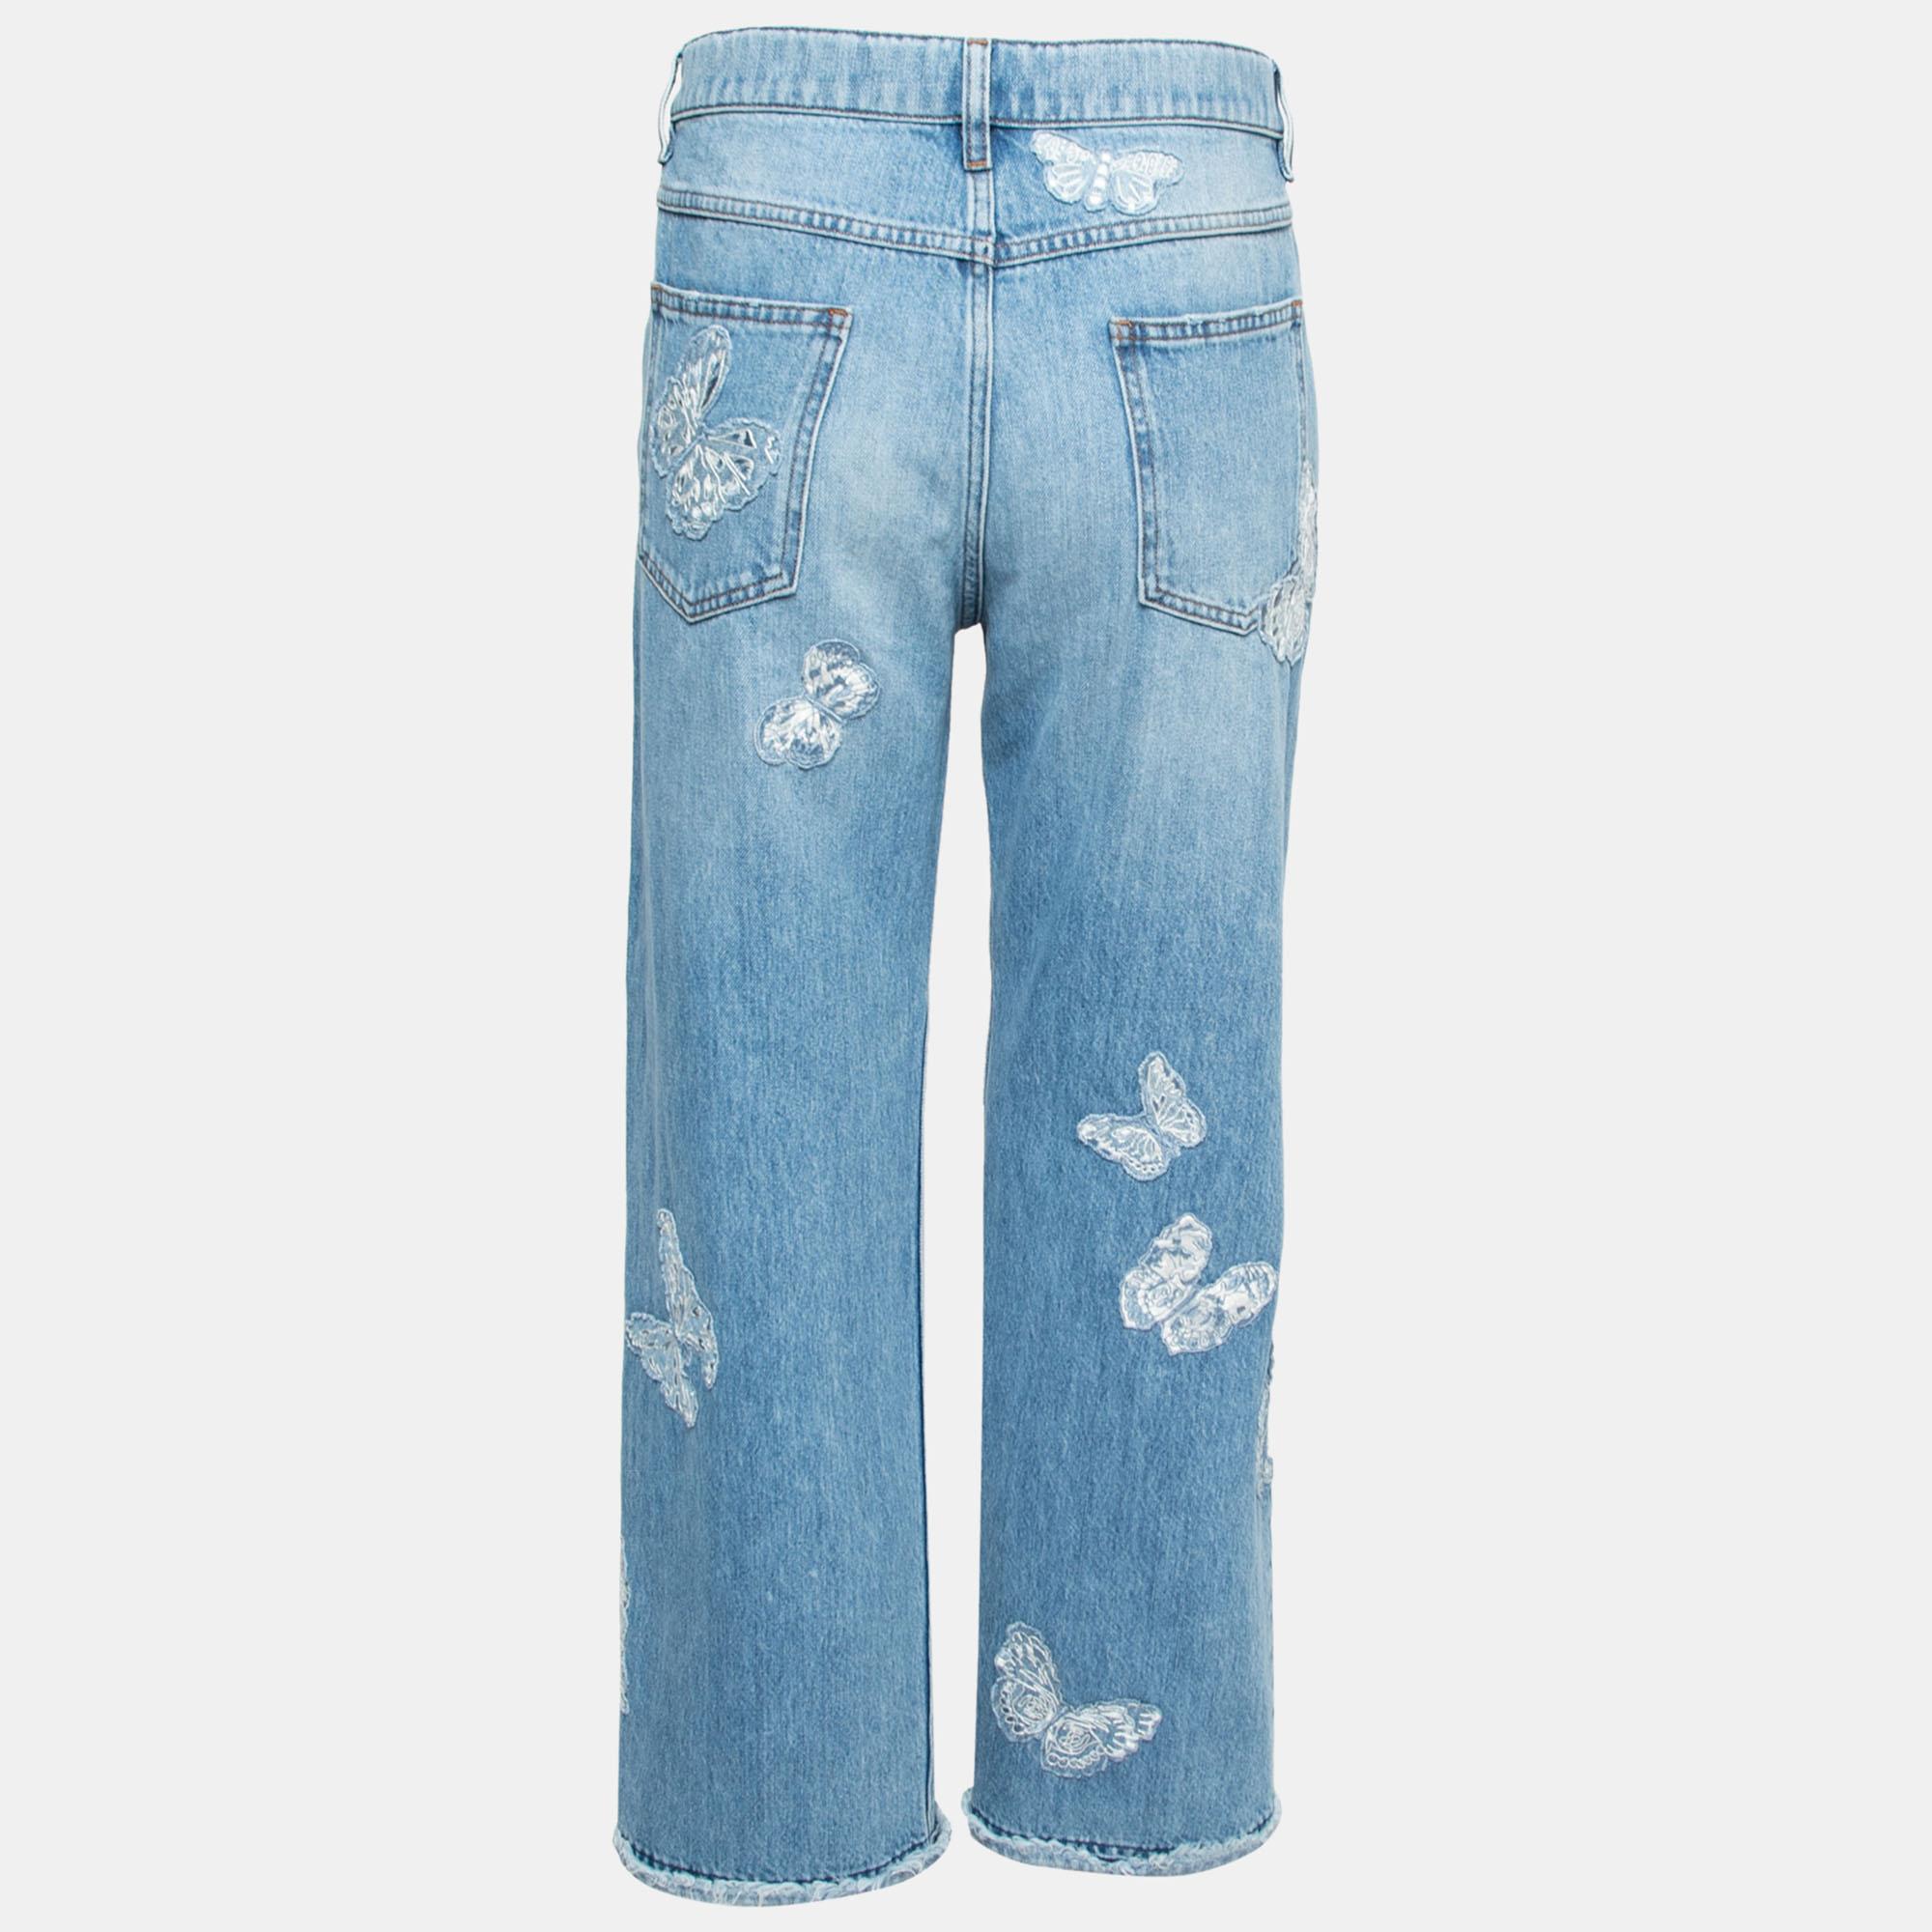 Good-fitting jeans are a wardrobe essential, hence, we bring you this Valentino creation. It has been tailored with a blend of quality materials and flaunts a blue shade with signature butterfly details. Style it with t-shirts and sneakers.

